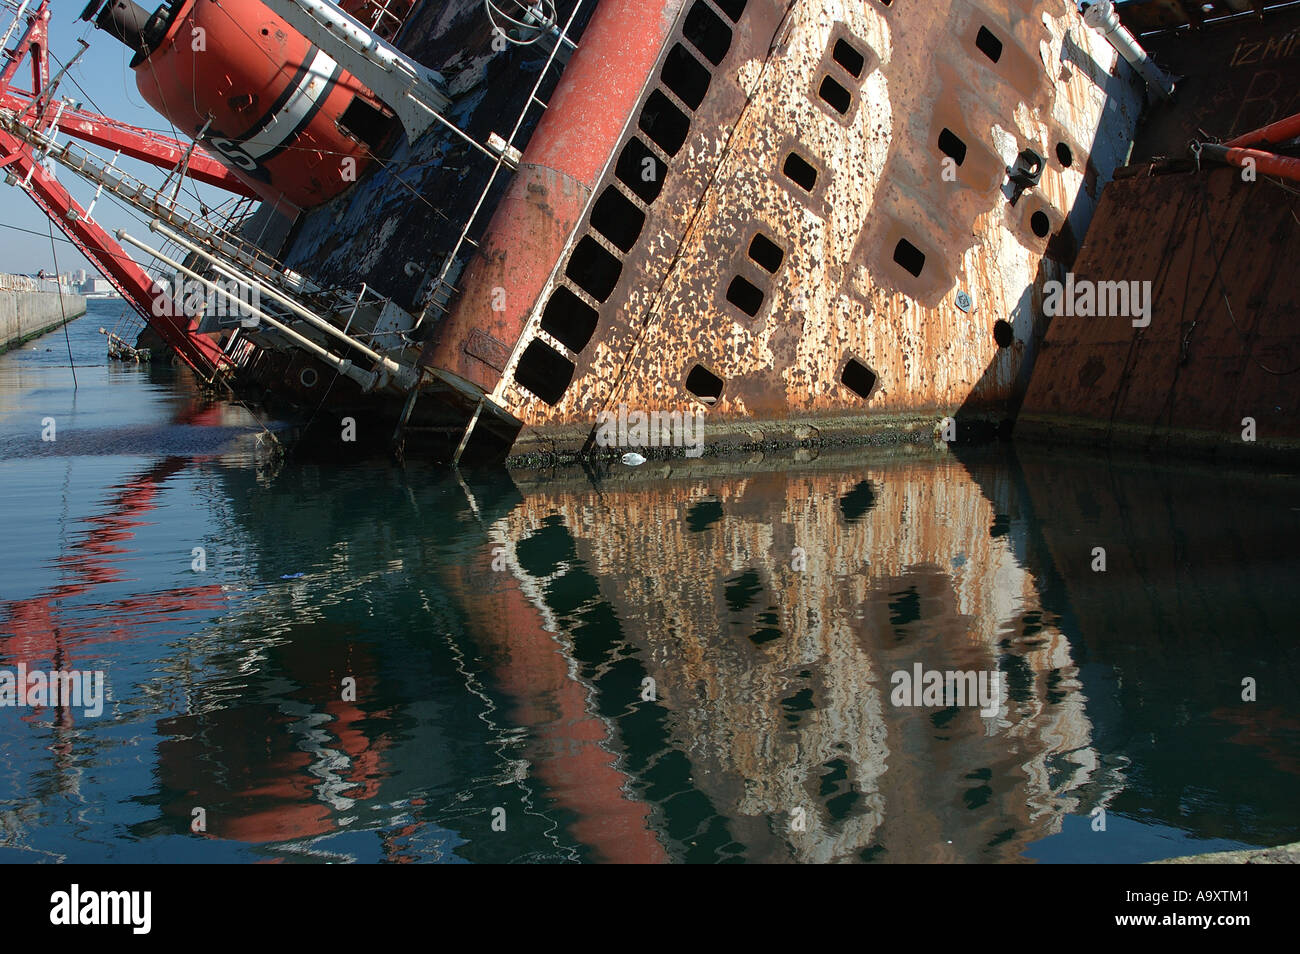 A half sunken ship with it's reflection. Sultanahmet area, Istanbul, Turkey Stock Photo